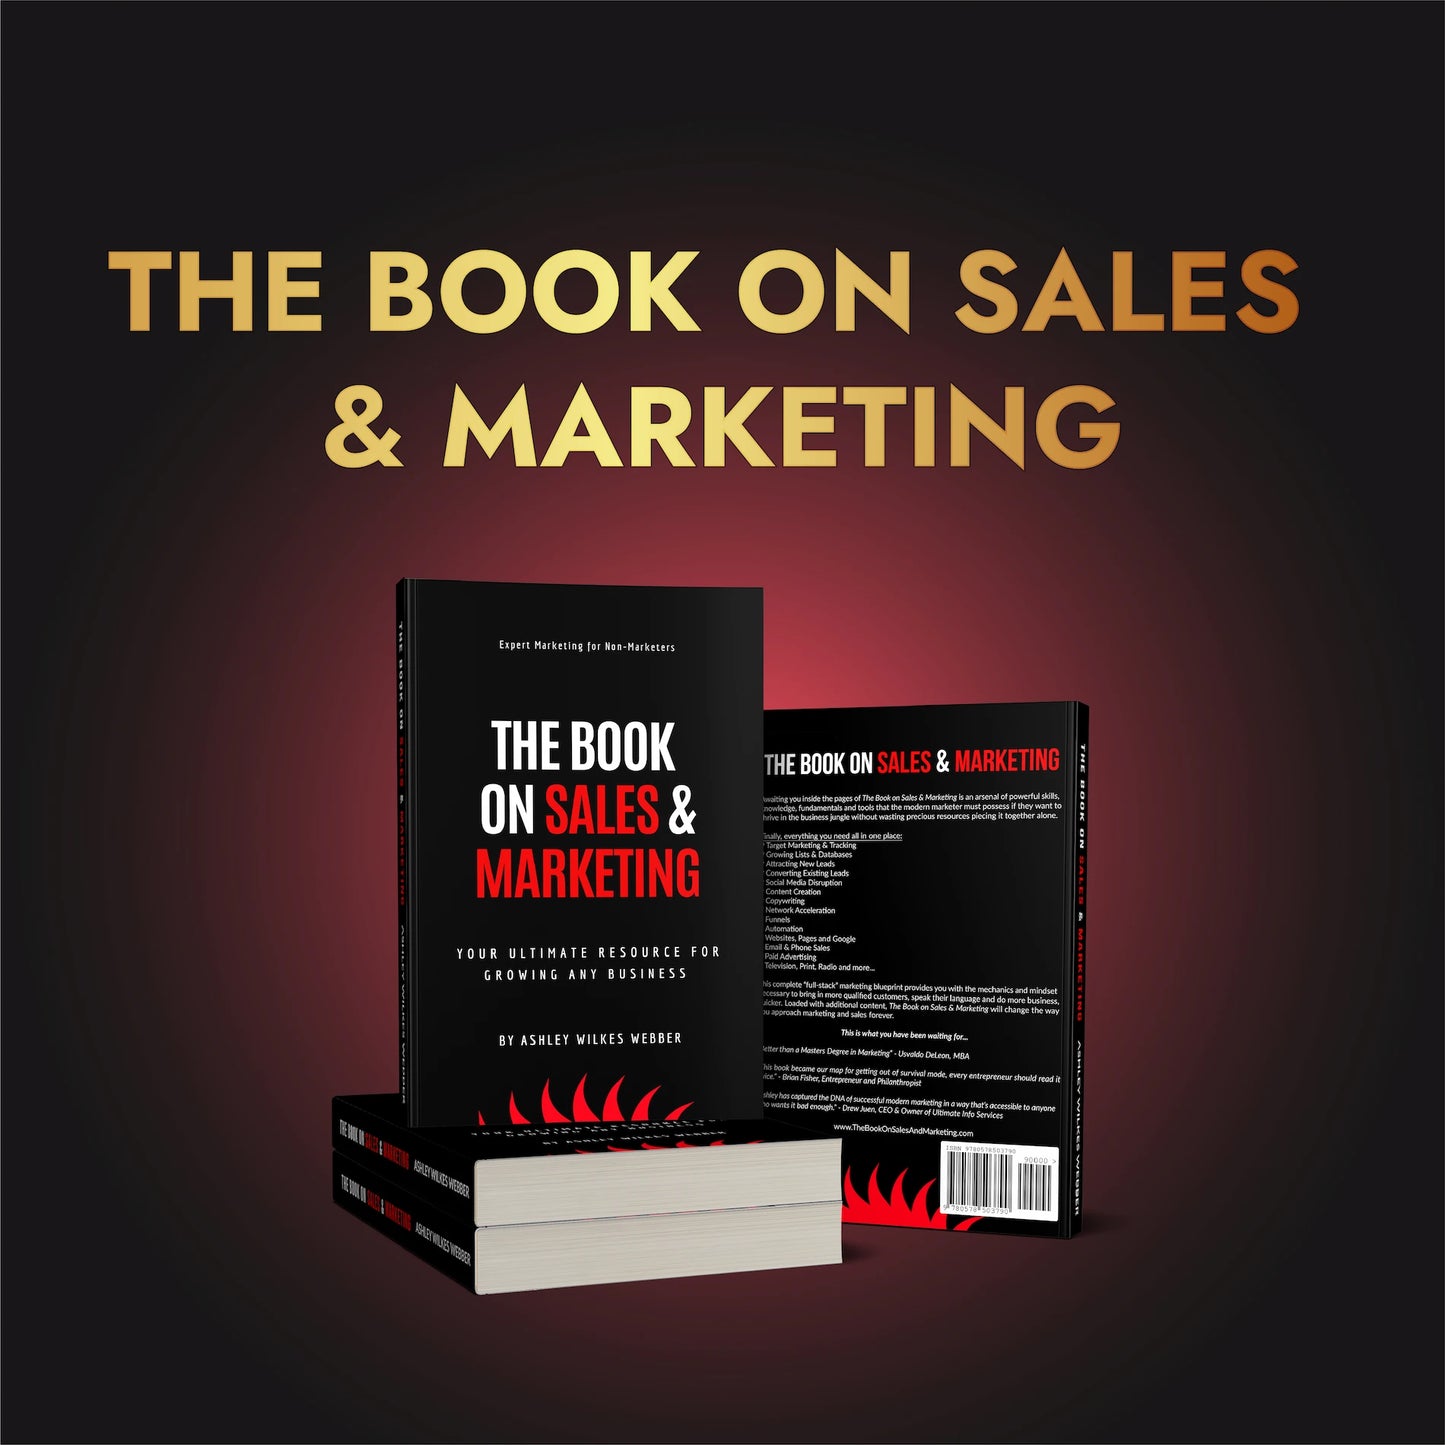 The Book on Sales & Marketing